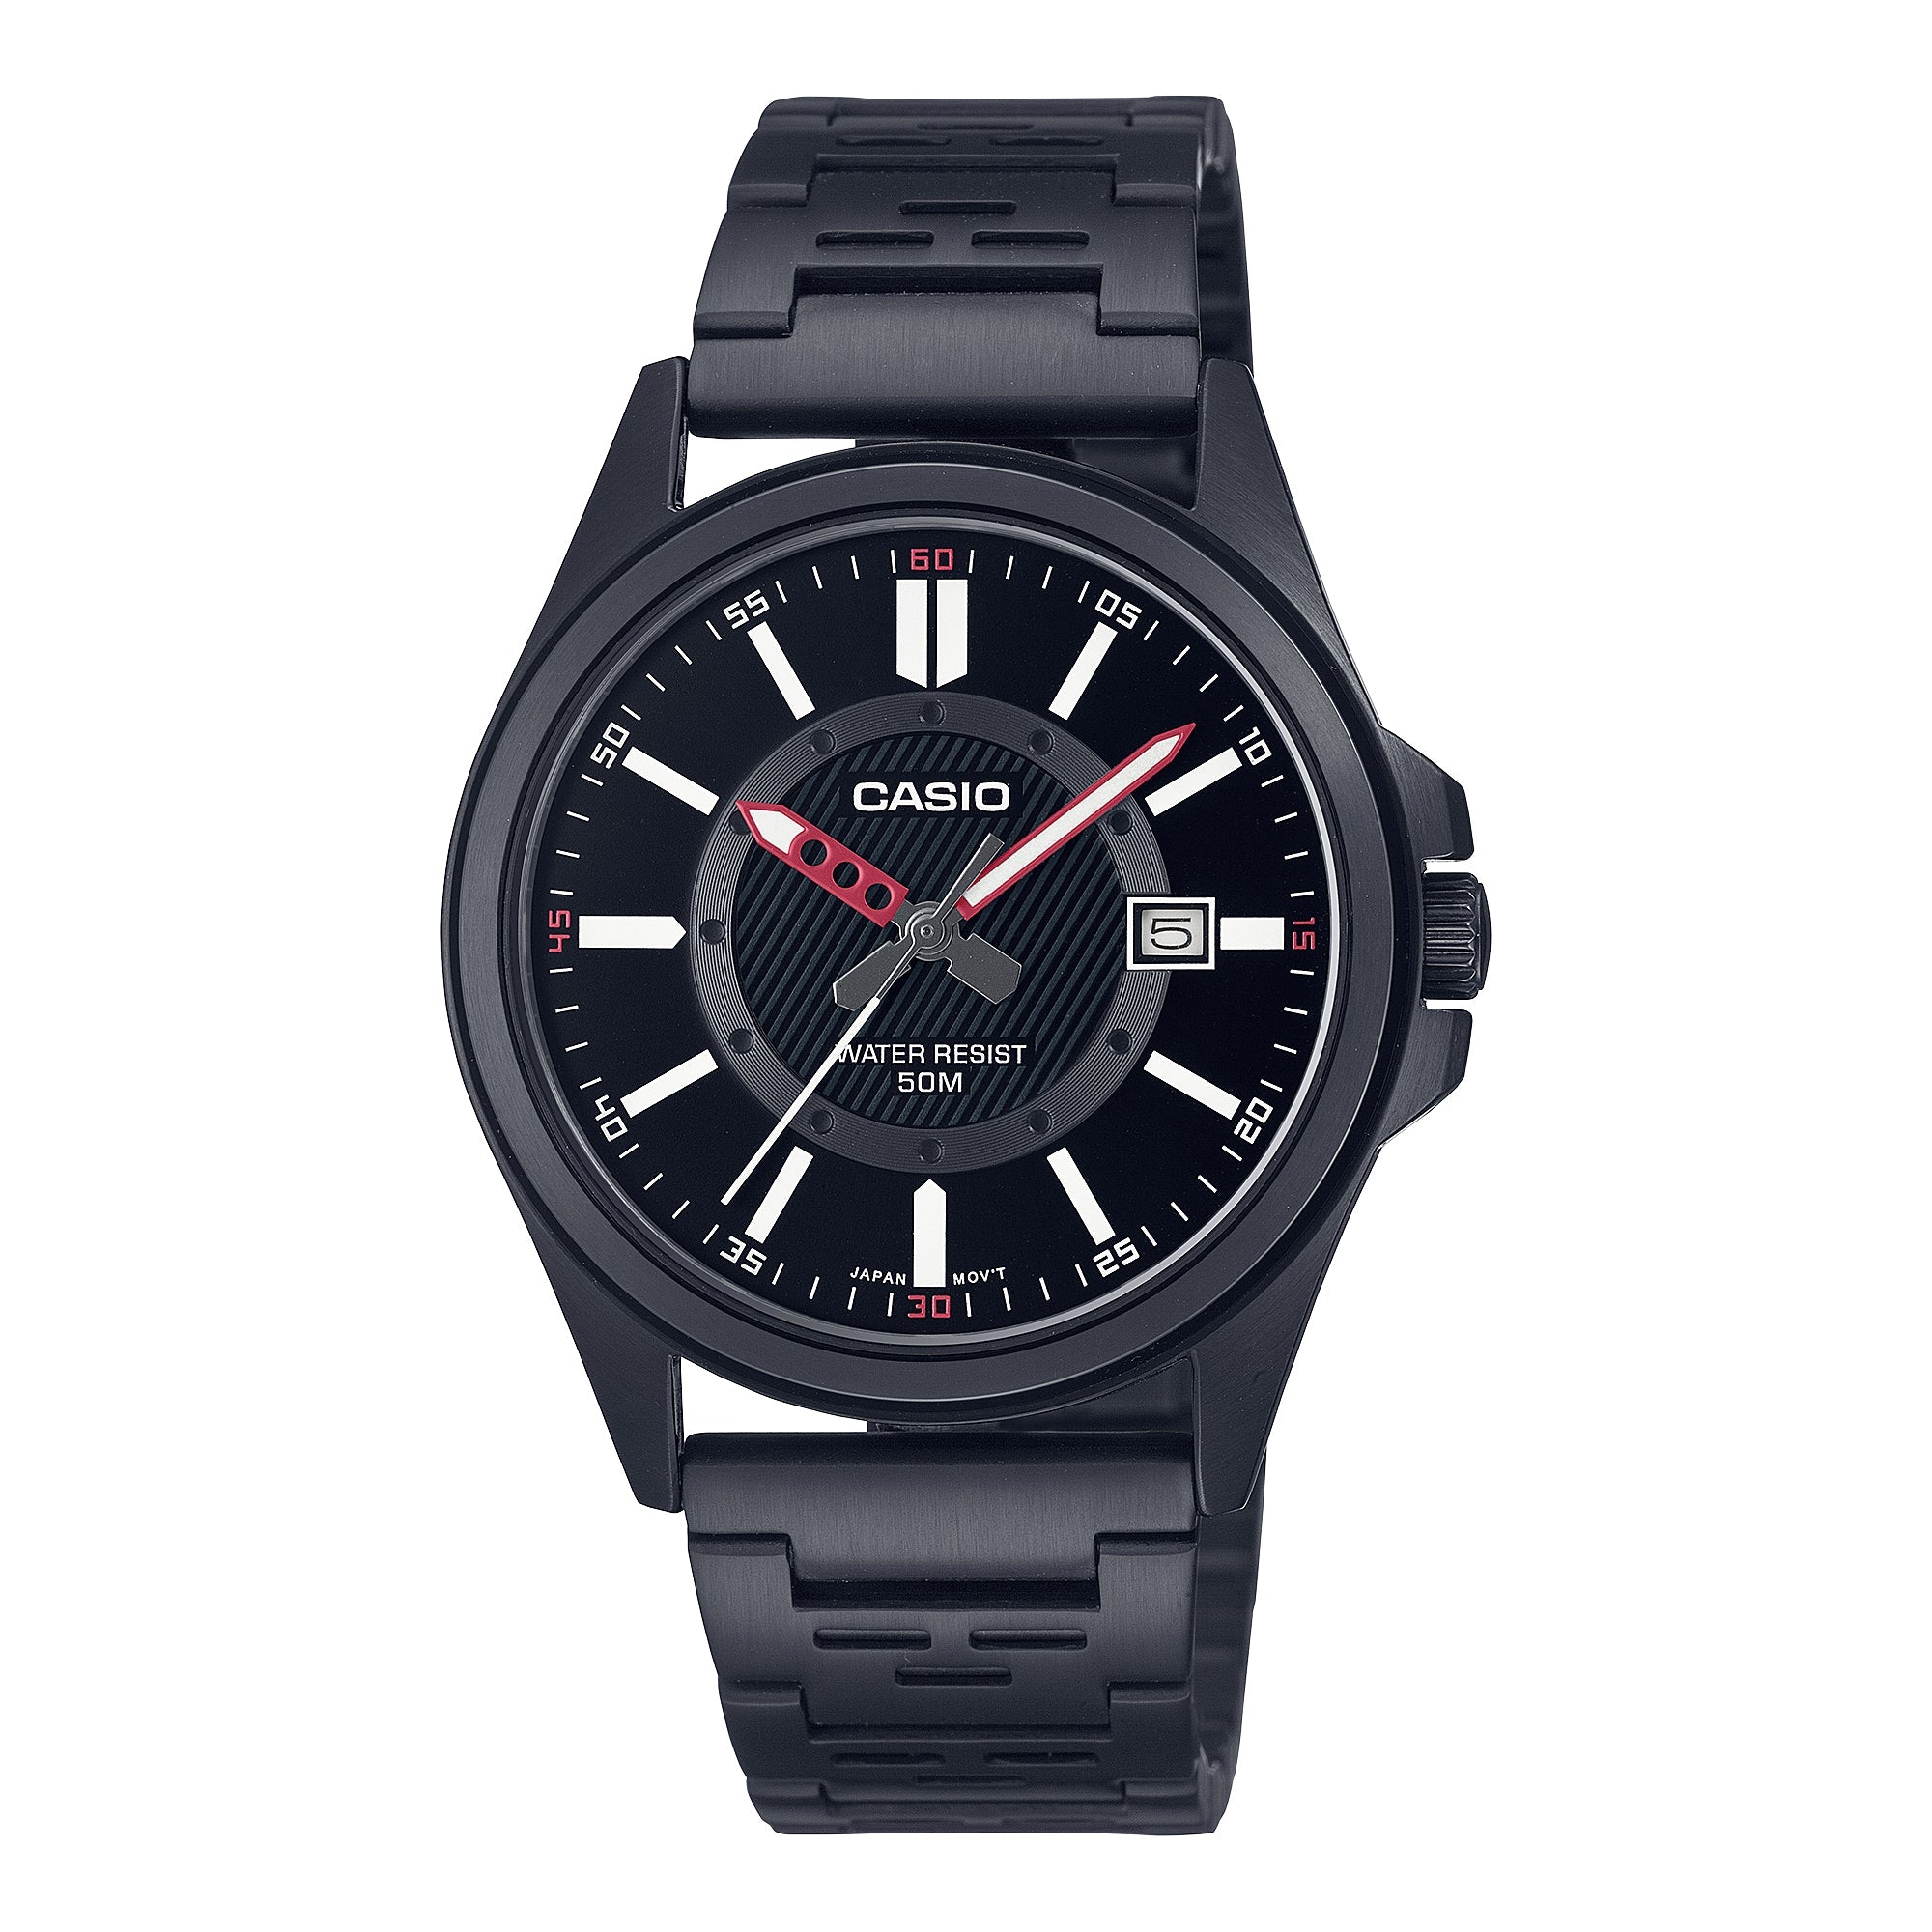 Casio Men's Analog Black Ion Plated Stainless Steel Band Watch MTPE700B-1E MTP-E700B-1E Watchspree